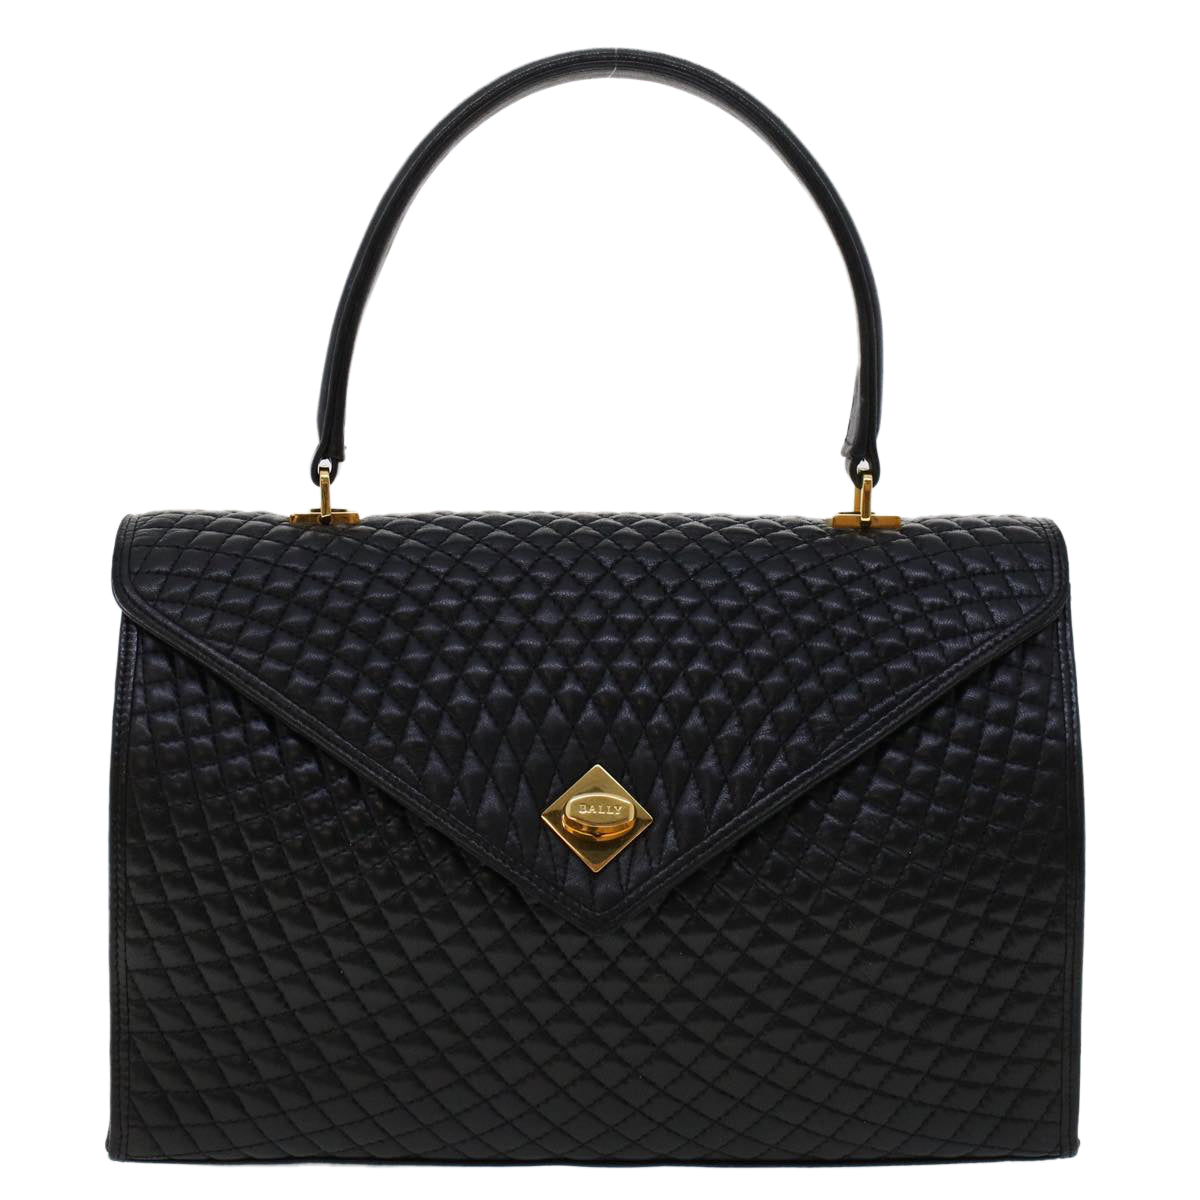 BALLY Quilted Hand Bag Leather Black Auth 45898